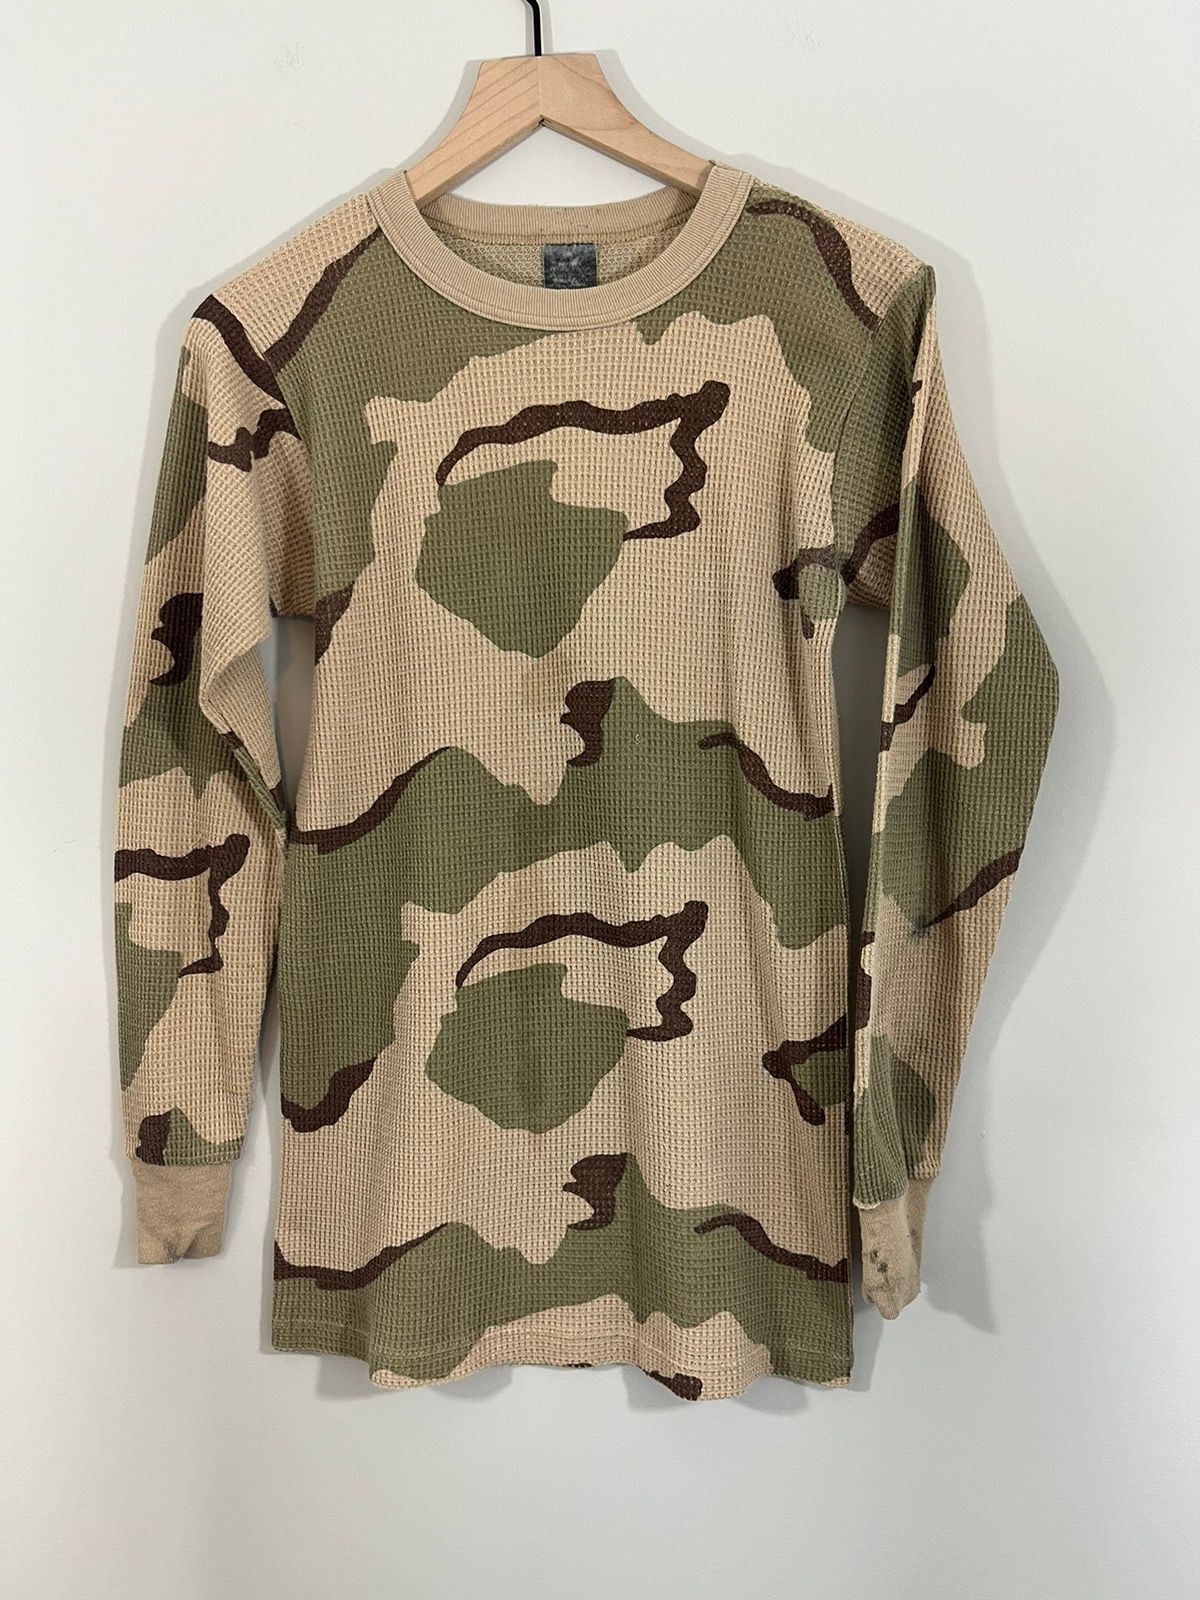 Vintage Vintage Distressed Thermal Knit Camo Stained Long Sleeve Size US S / EU 44-46 / 1 - 1 Preview